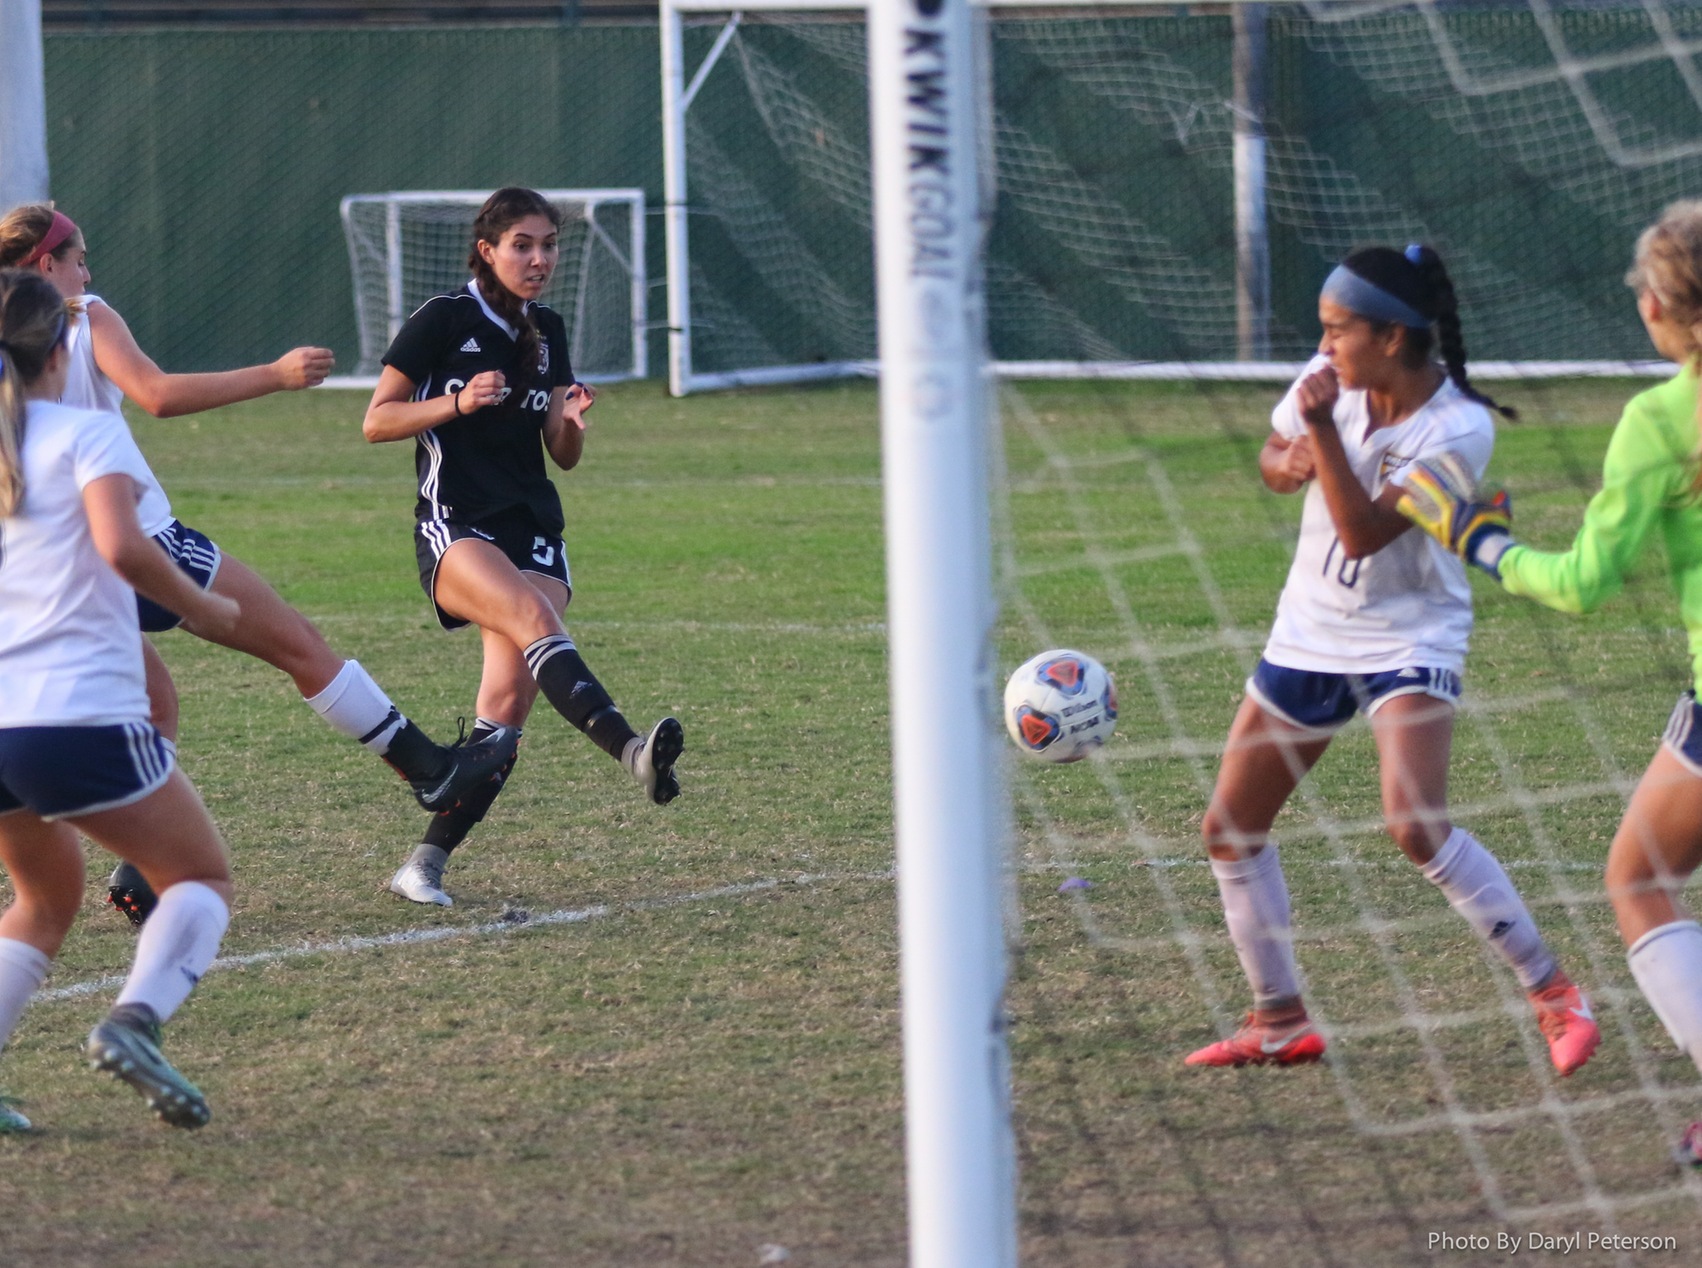 Erika Garcia scores the game-winning goal for the Falcons in the playoffs